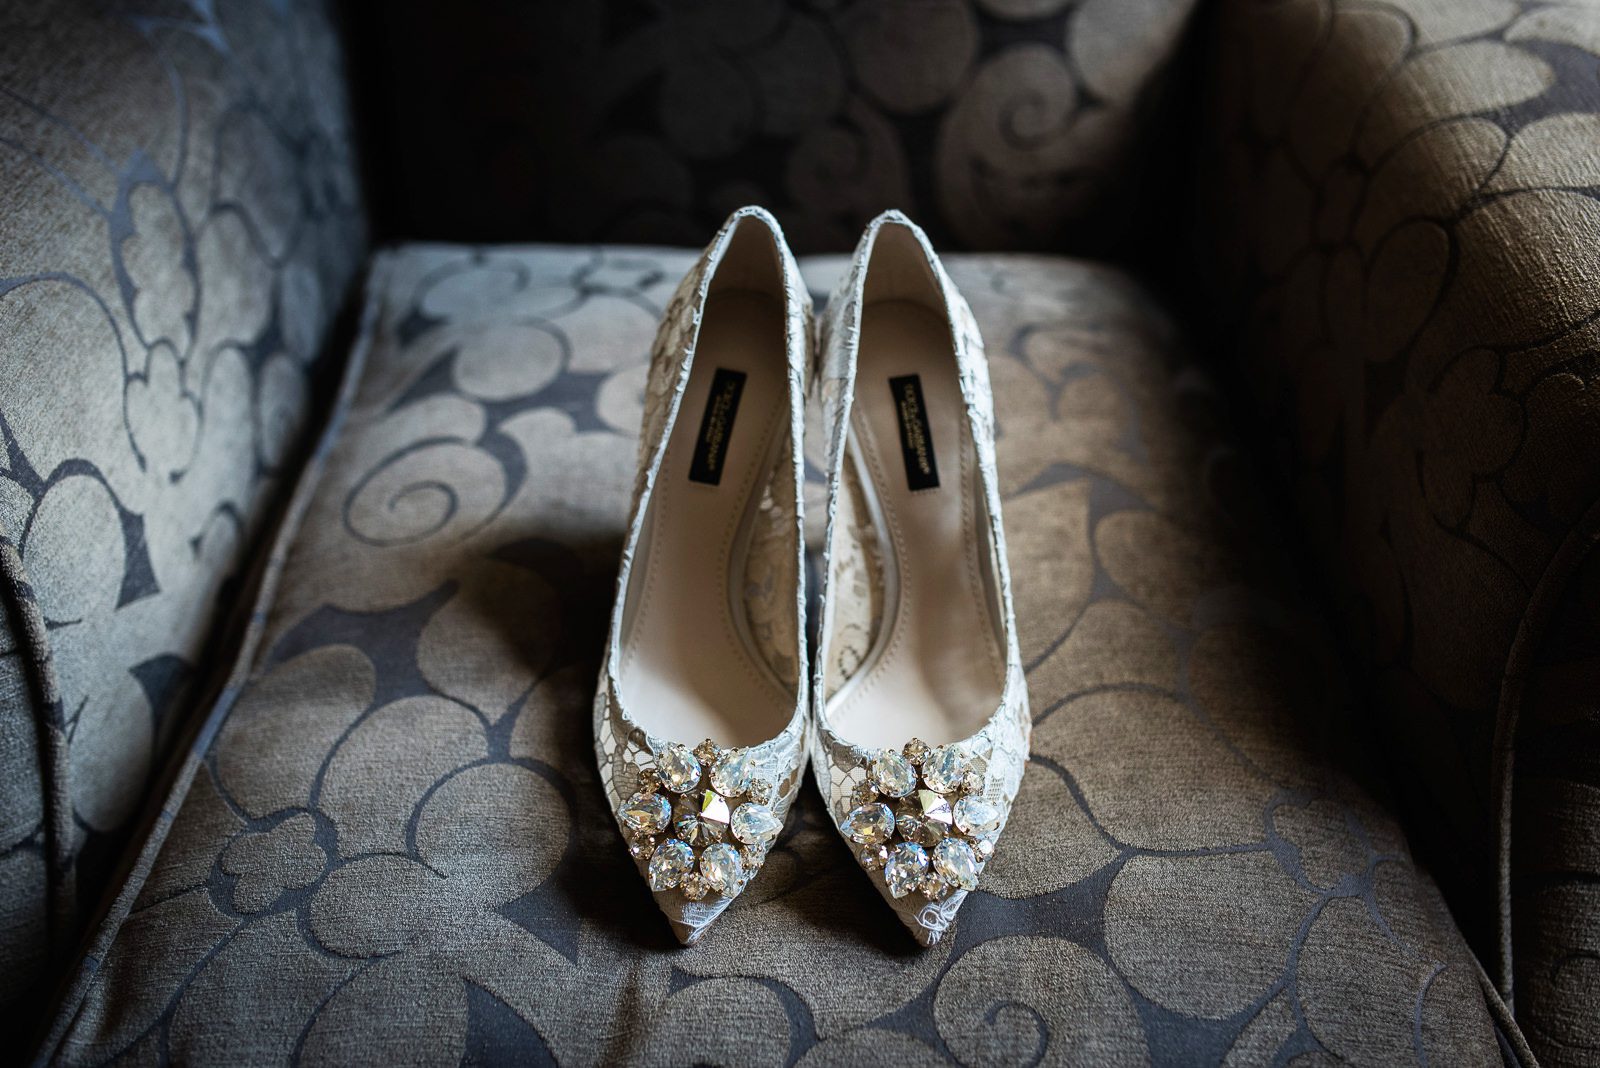 Dolce & gabanna PUMP IN TAORMINA LACE WITH CRYSTALS